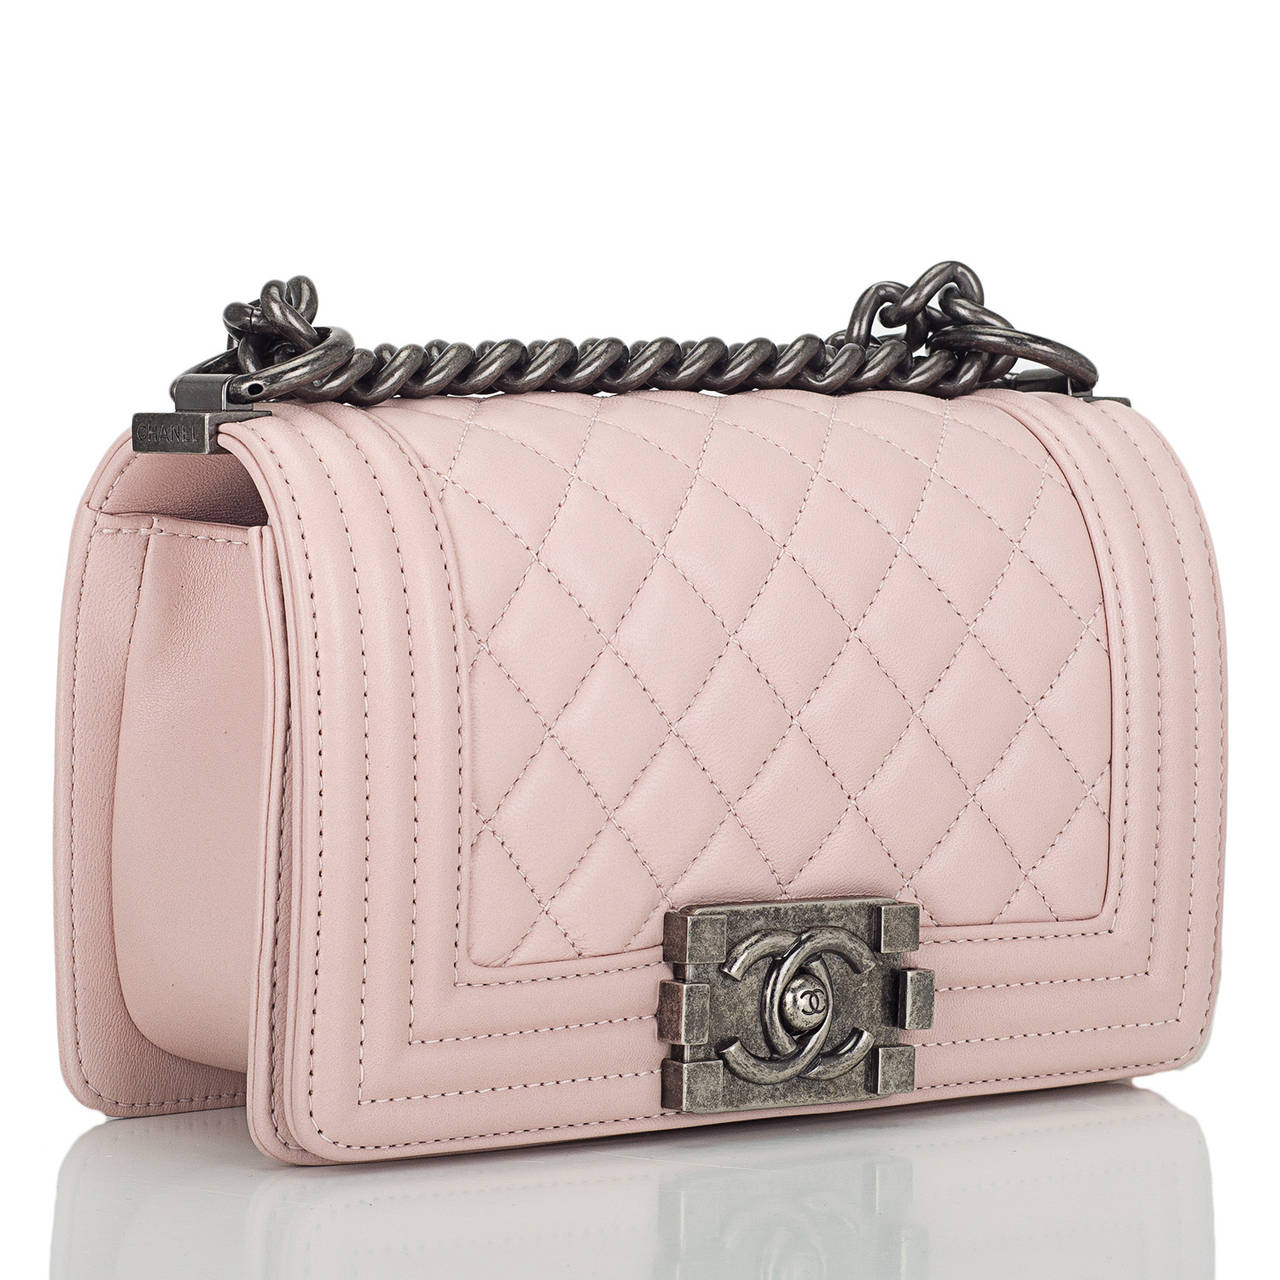 Chanel Small Boy bag of light pink lambskin leather with aged ruthenium hardware.

This Boy Bag has a full front flap with the Boy signature CC push lock closure with an aged ruthenium chain link and light pink leather padded shoulder/crossbody